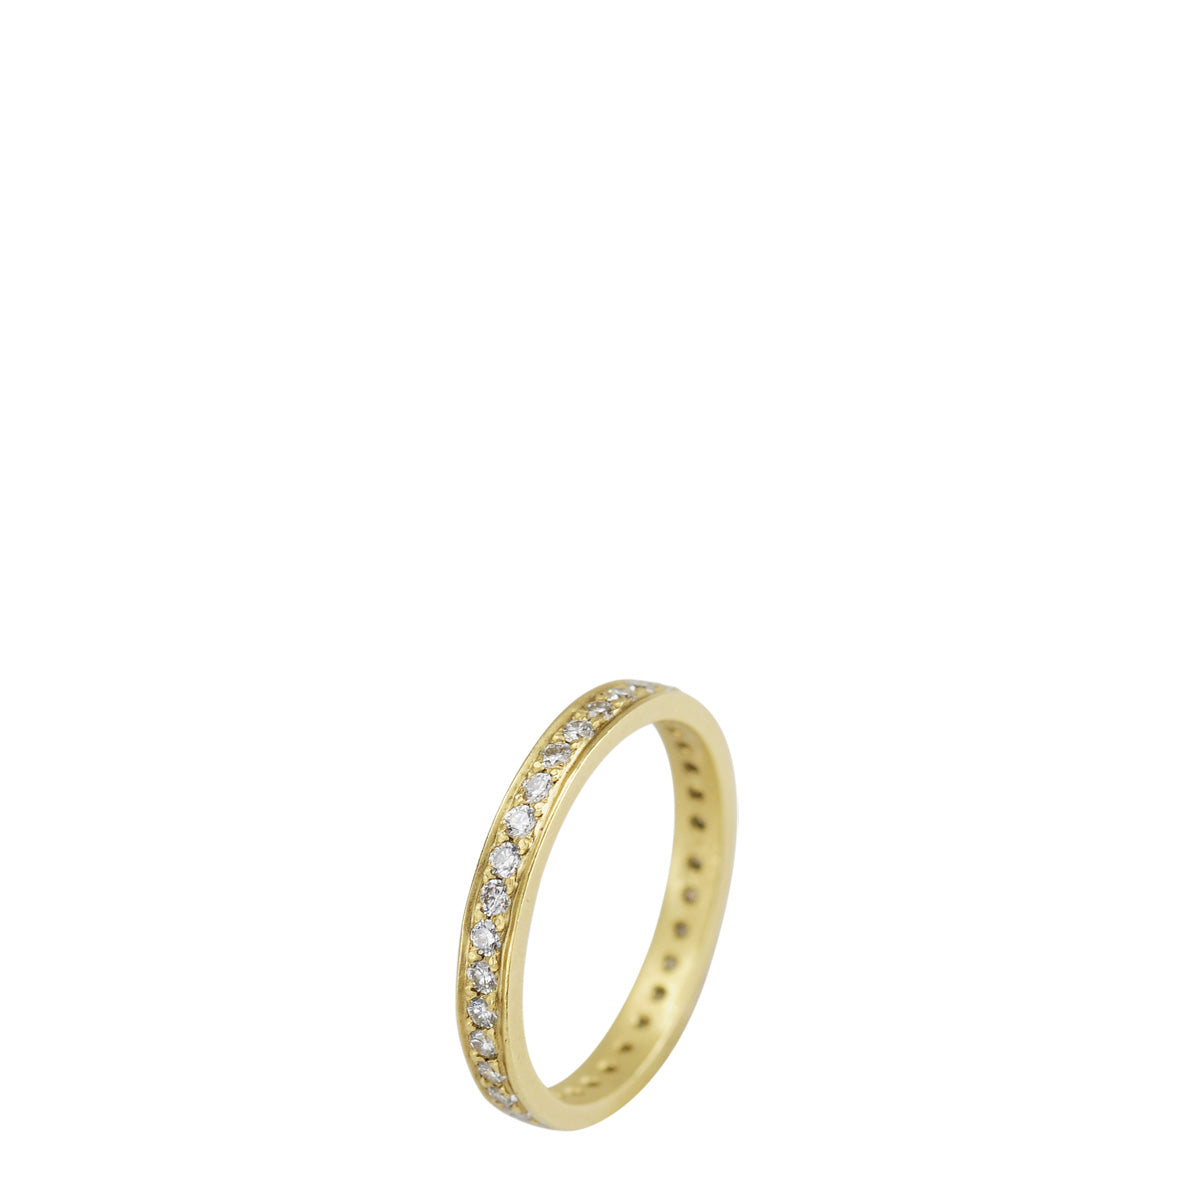 18K Gold 2.5mm Band with 1.5mm Brilliant Cut Diamonds